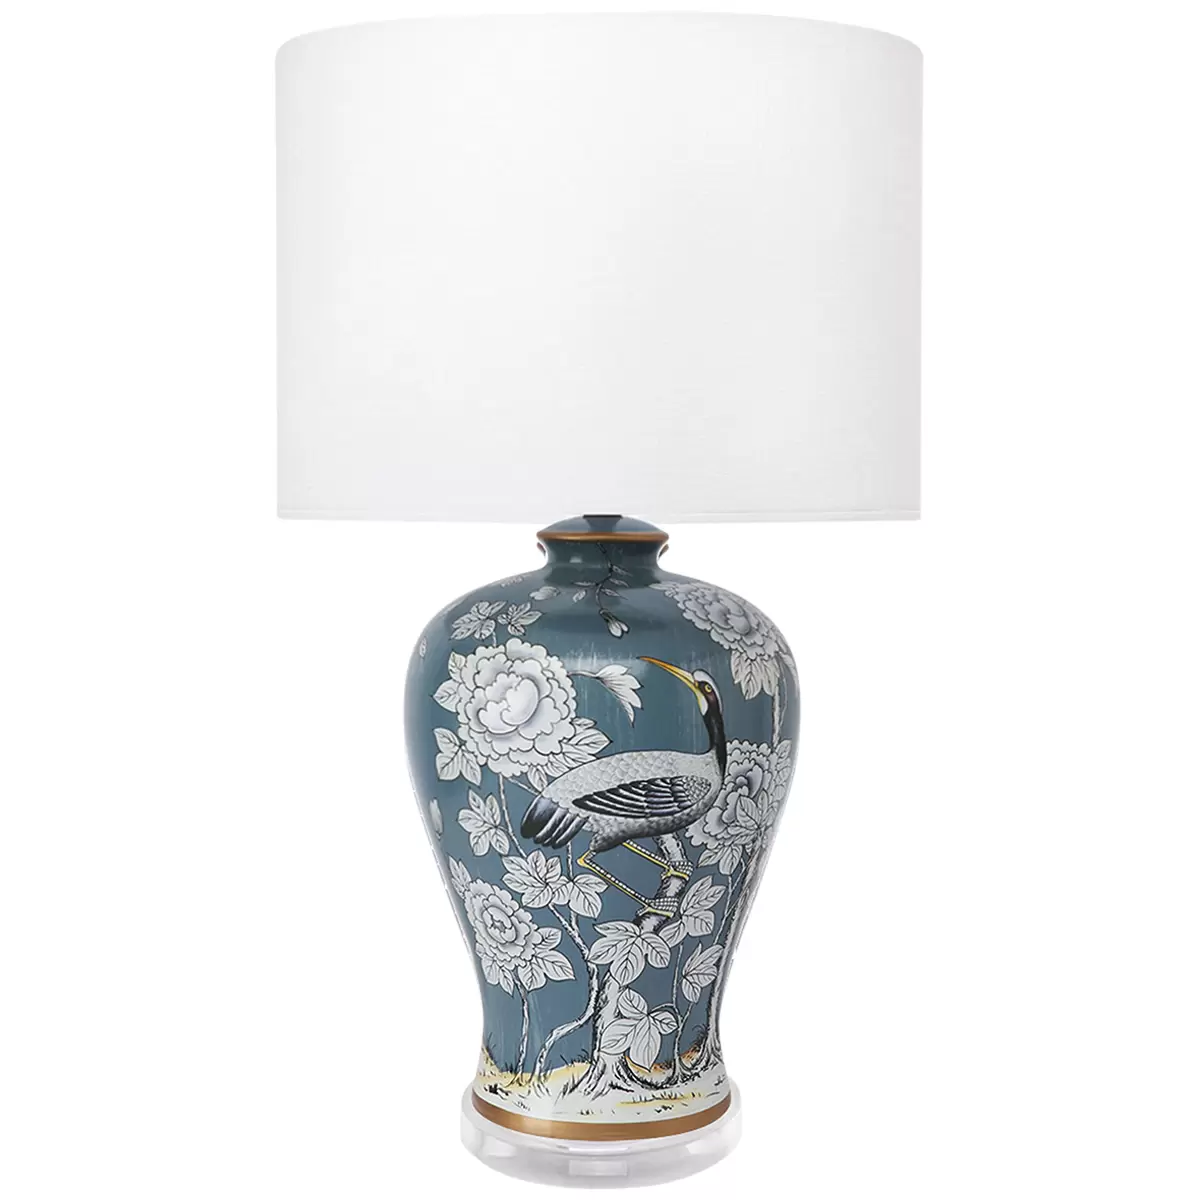 CAFE Lighting & Living Seraphine Table Lamp Blue